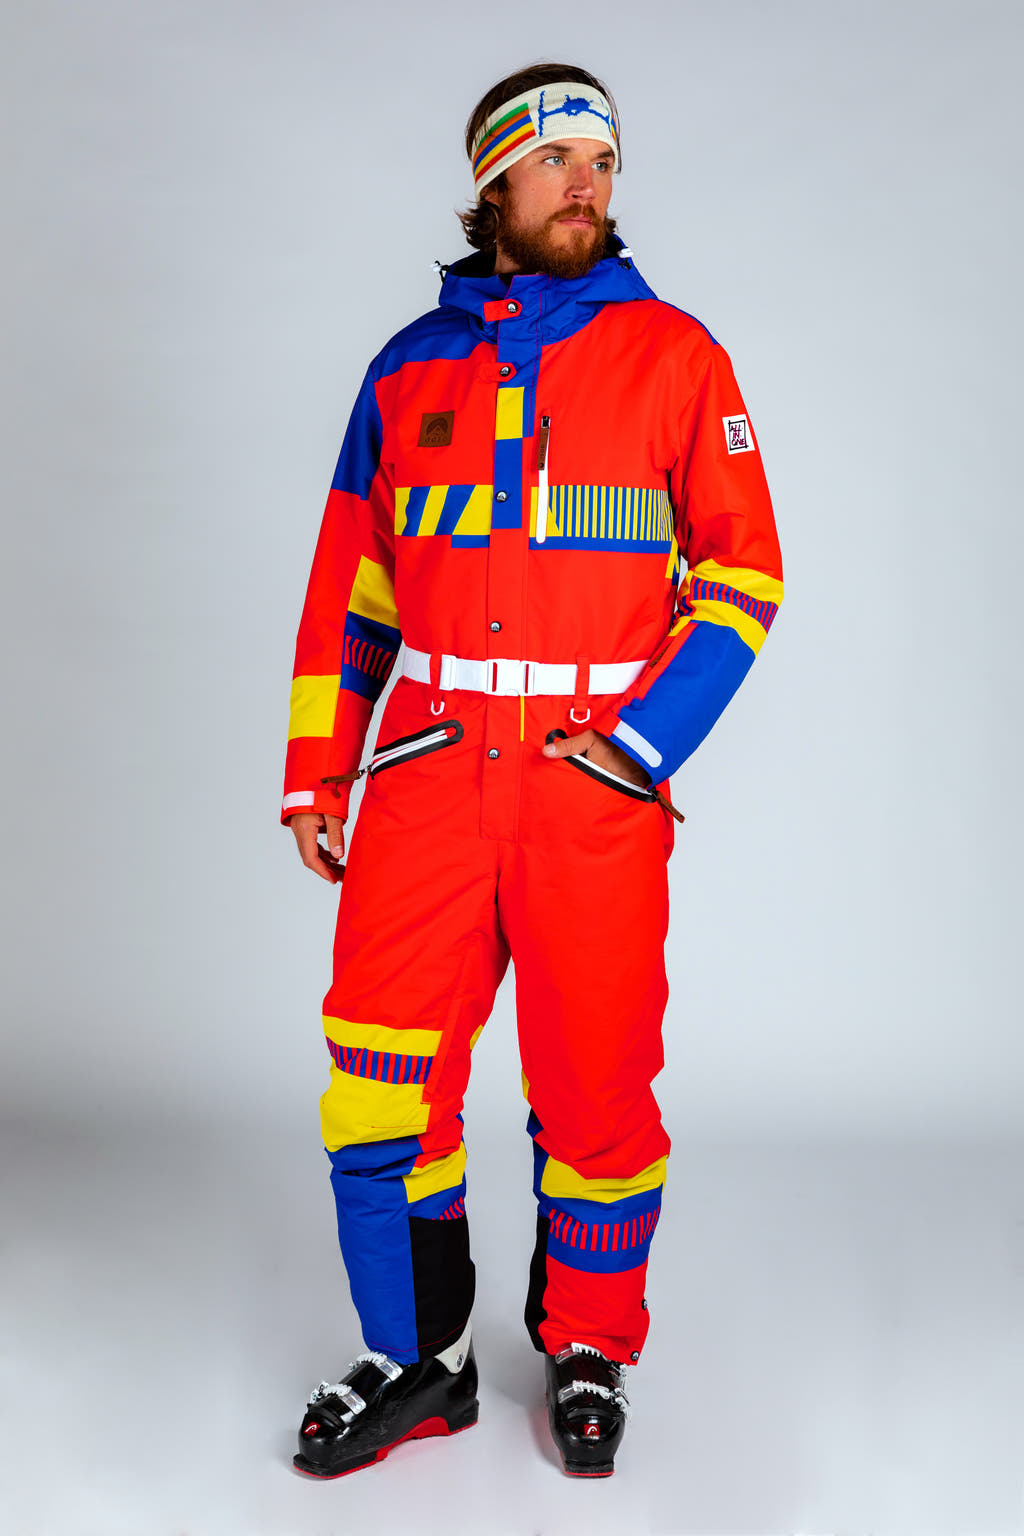 A man in a vintage ski suit, ready for a day of nostalgia and fun.